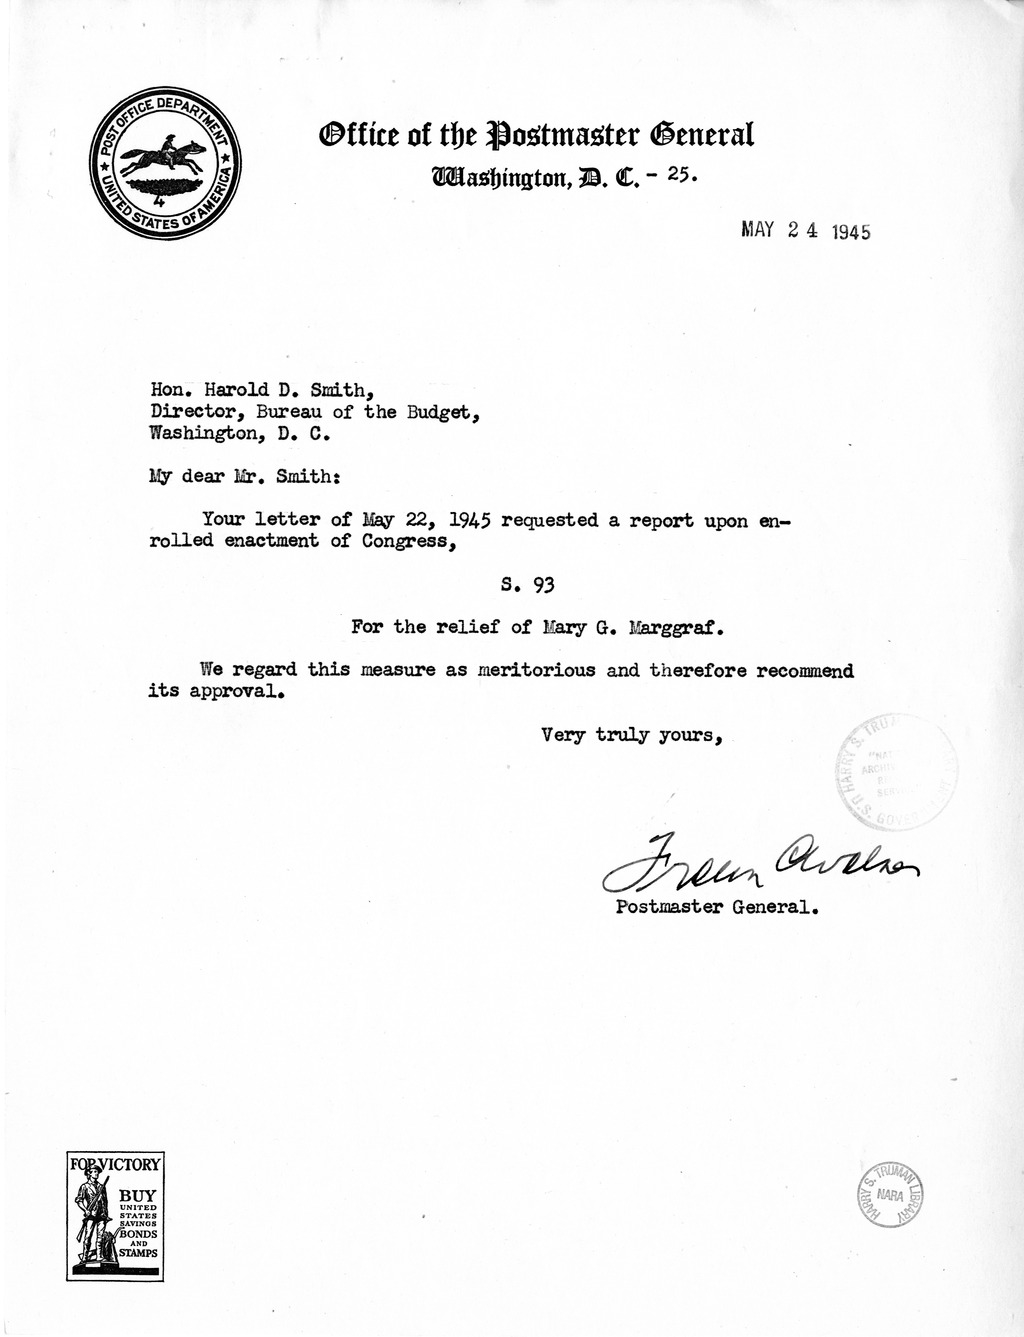 Memorandum from Frederick J. Bailey to M. C. Latta, S. 93, for the Relief of Mary G. Marggraf, with Attachments